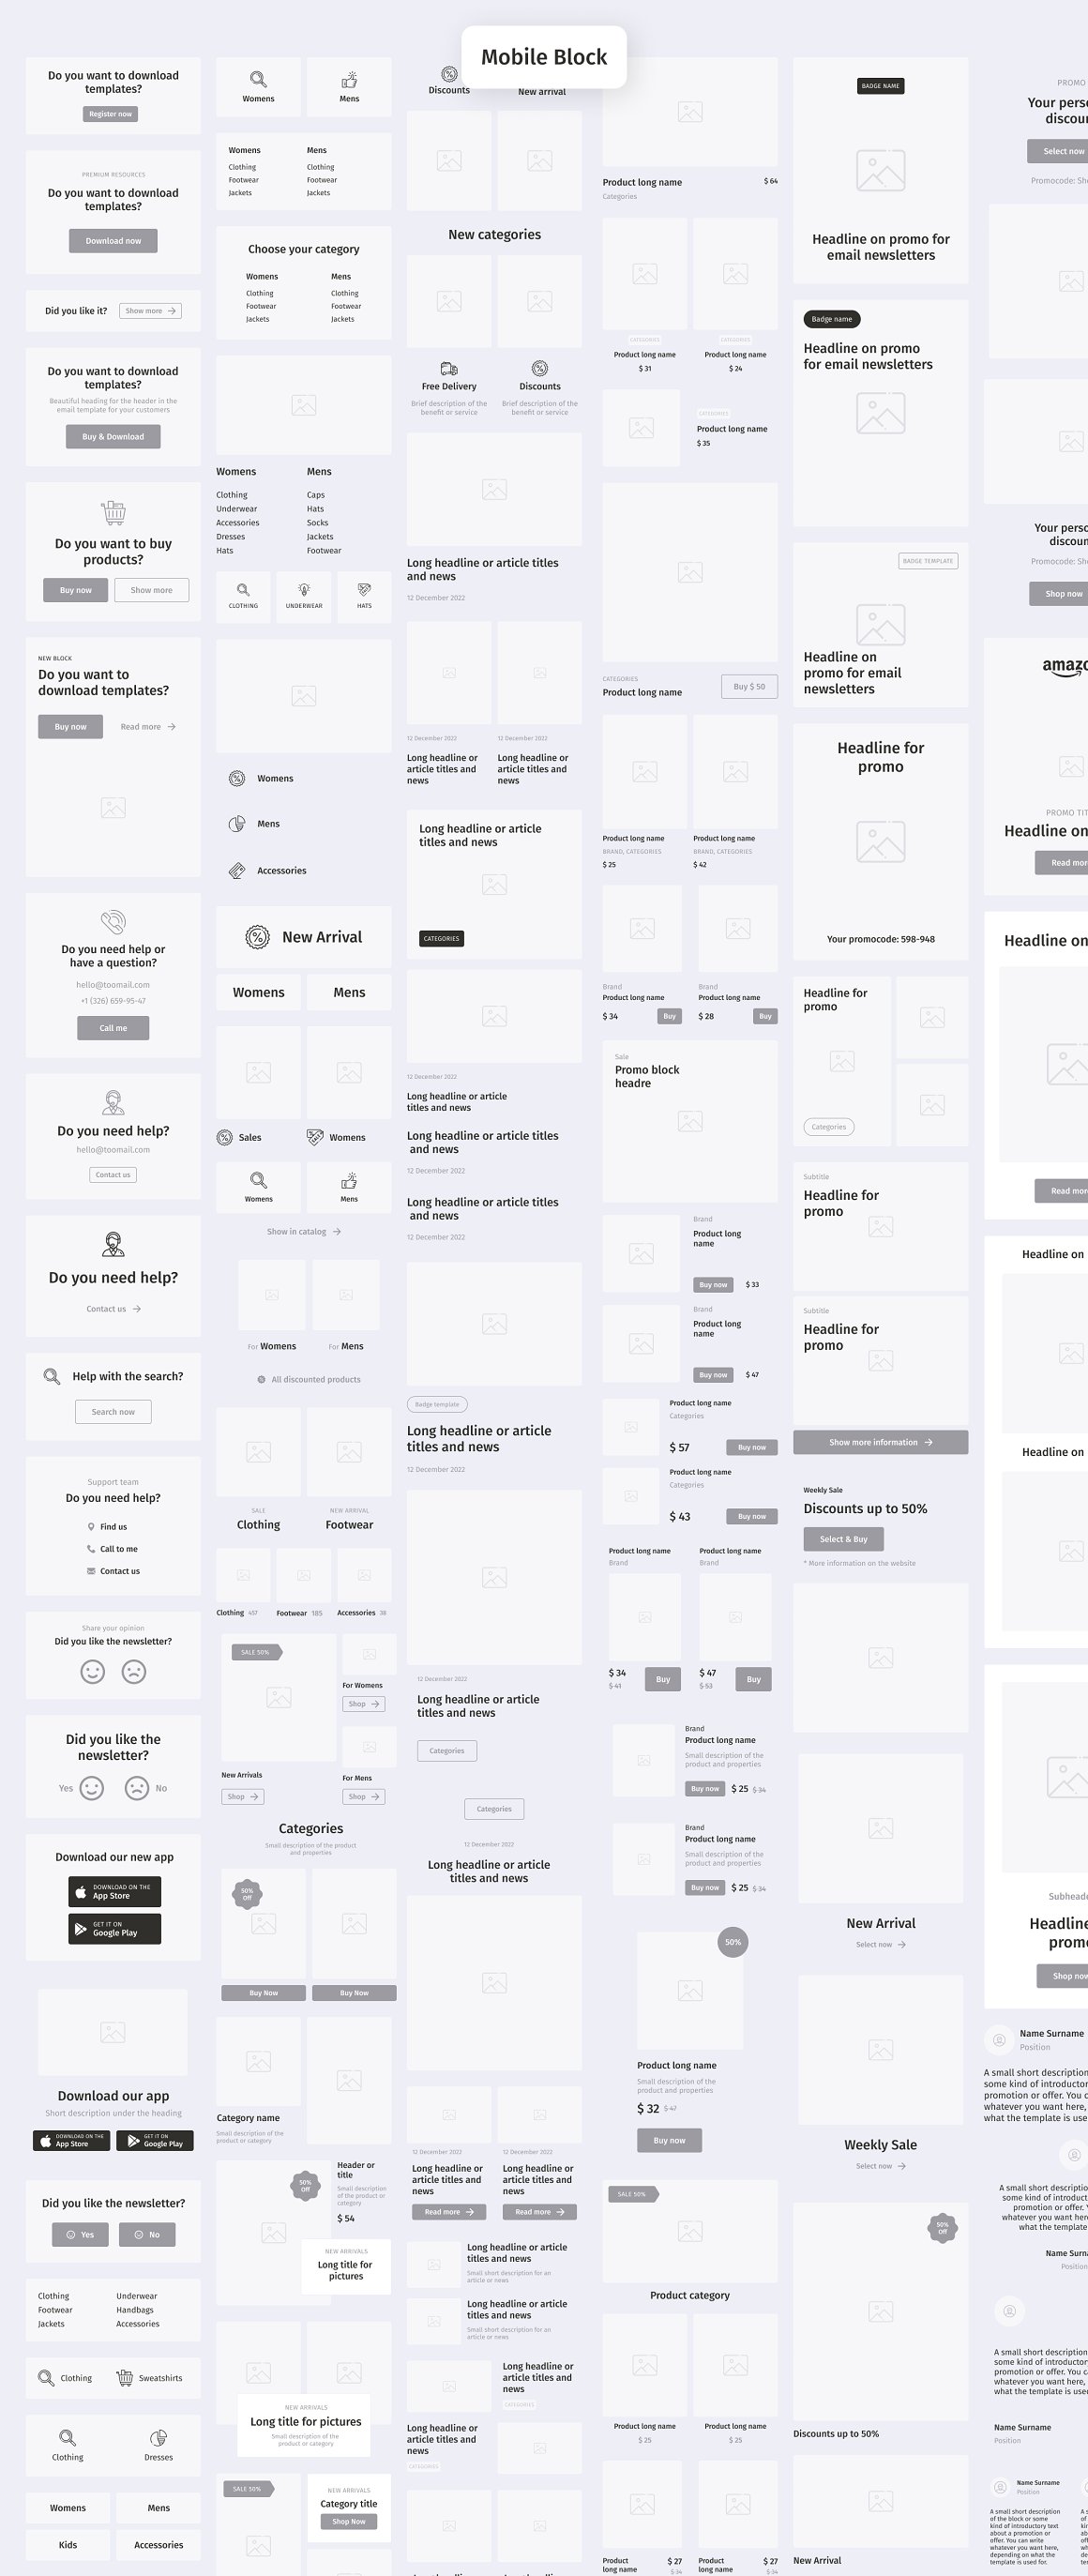 An image of an elegant wireframe email newsletter.